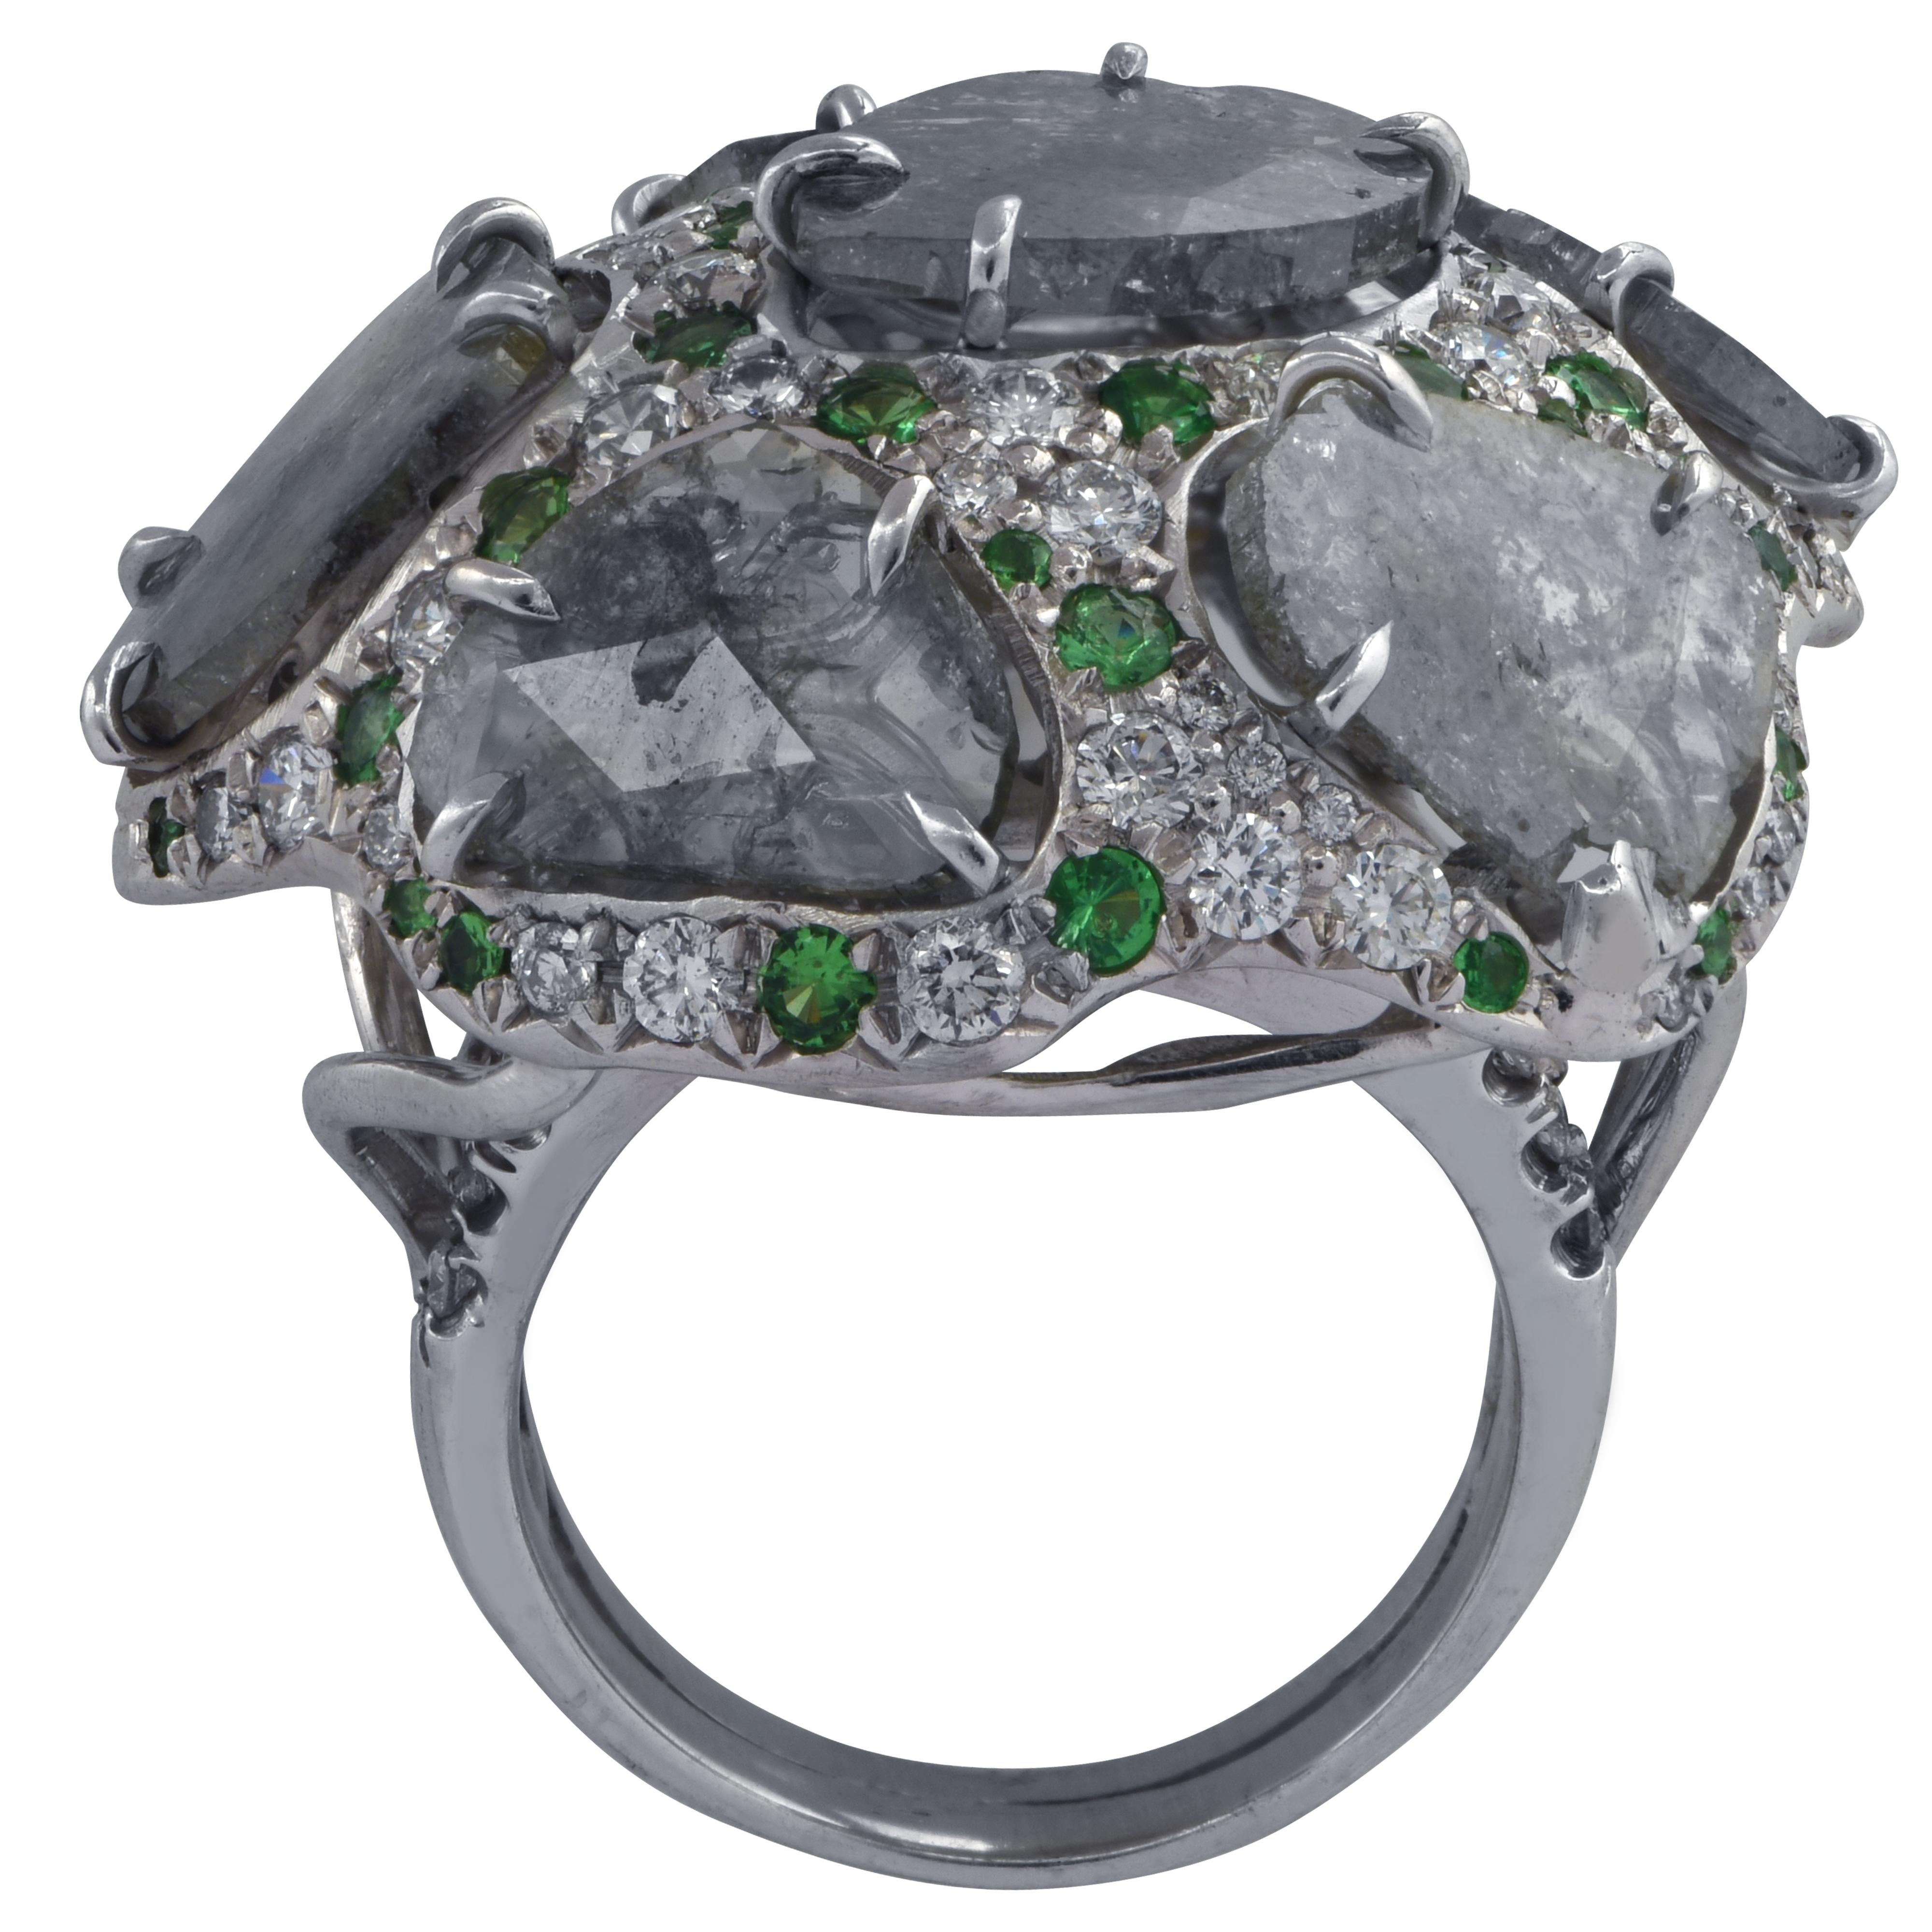 Striking domed ring crafted in 18k white gold featuring 5 diamond slices weighing approximately 10 carats total, accented by 80 round brilliant cut diamonds weighing approximately 1.30 carats total, G color VS clarity and 30 Tsavorite Garnets